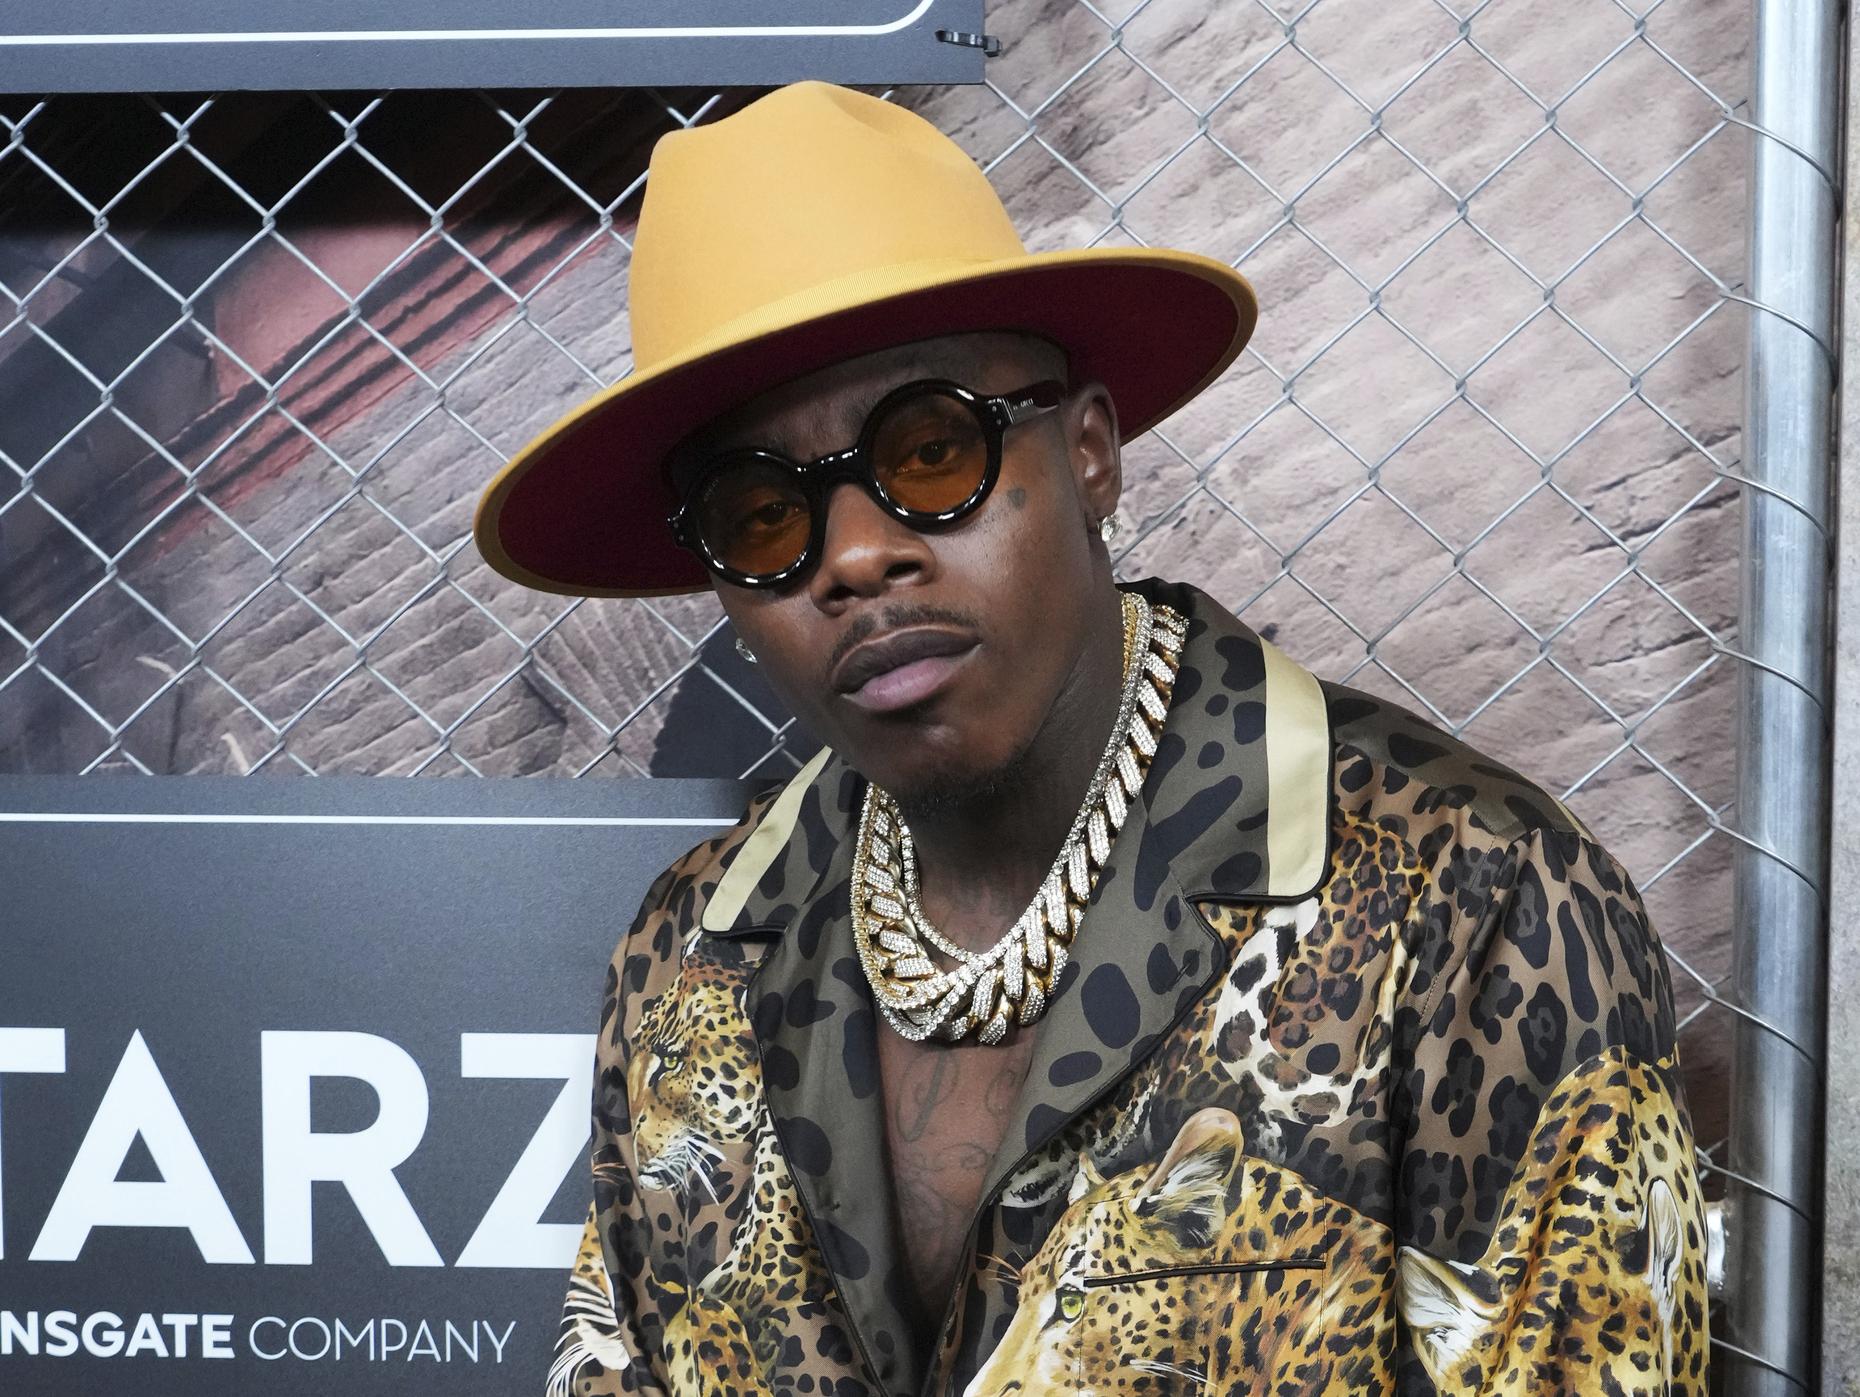 DaBaby Apologized, Engaged with Black LGBTQ Leaders